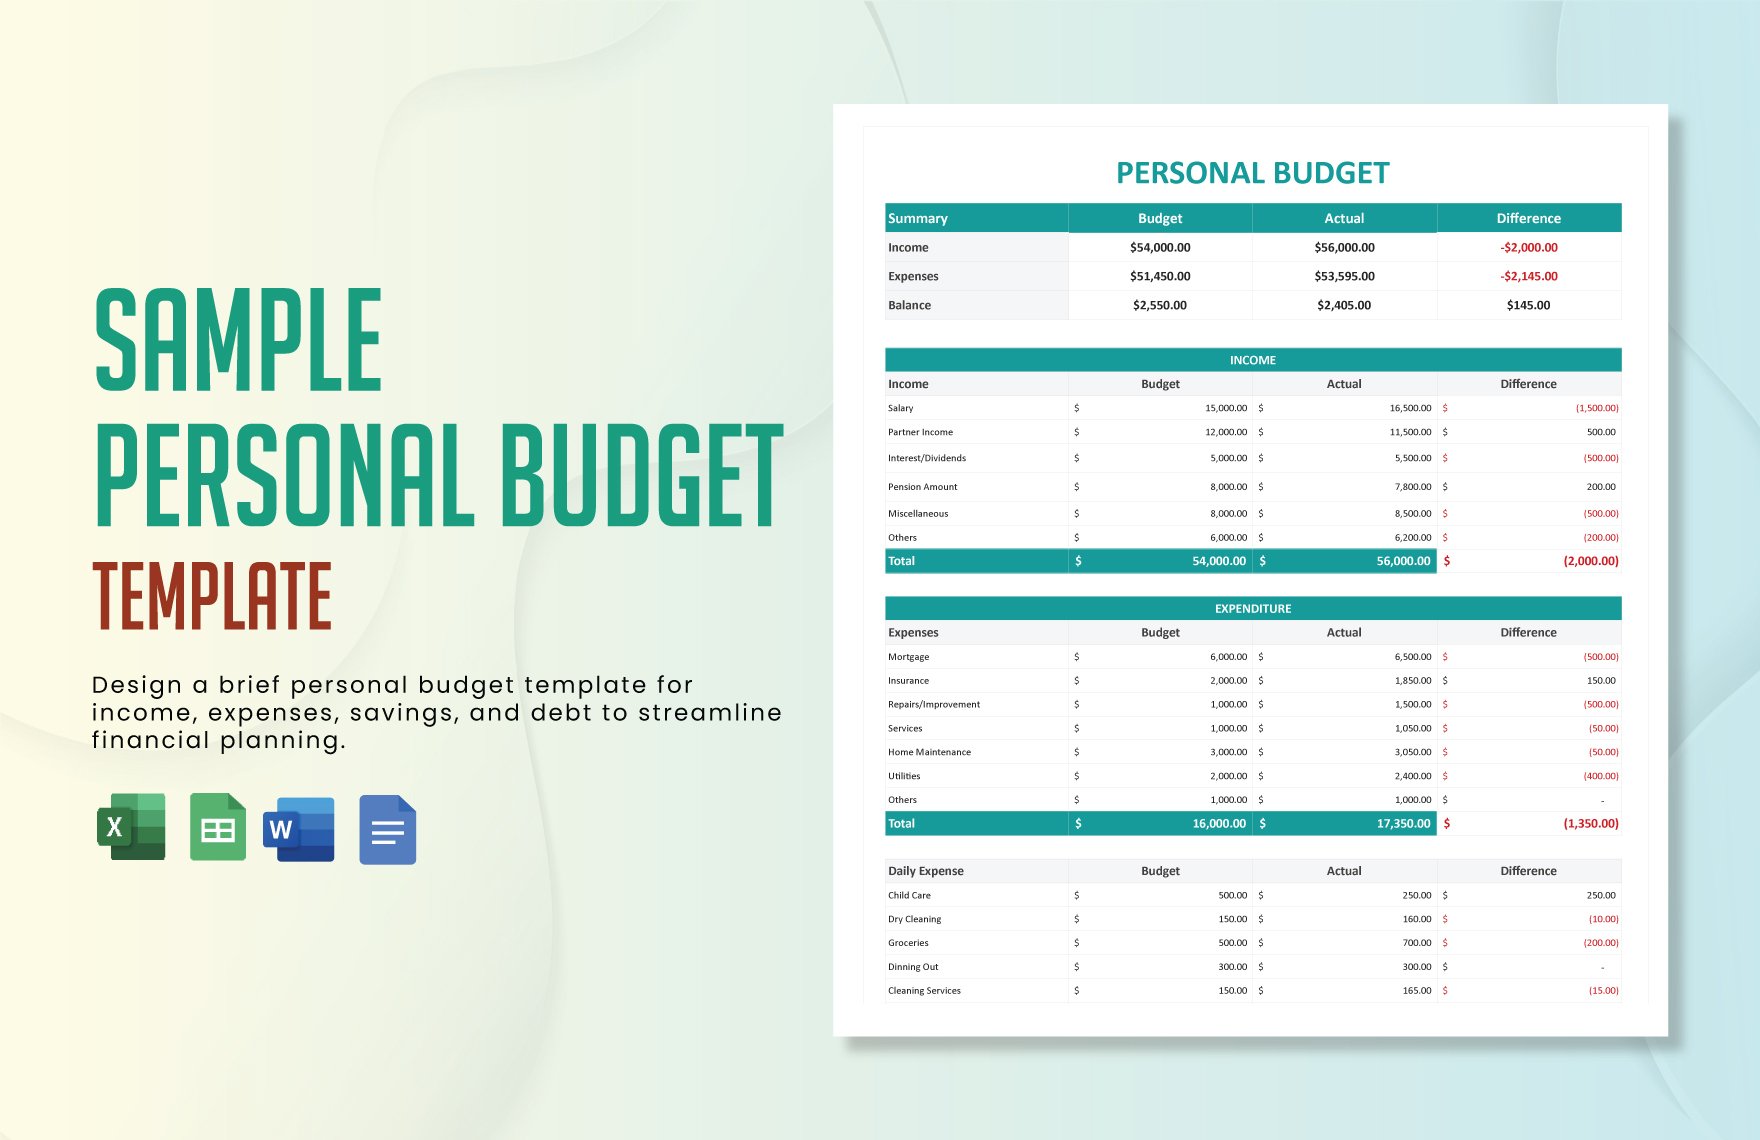 Sample Personal Budget Template in Word, Google Docs, Excel, Google Sheets